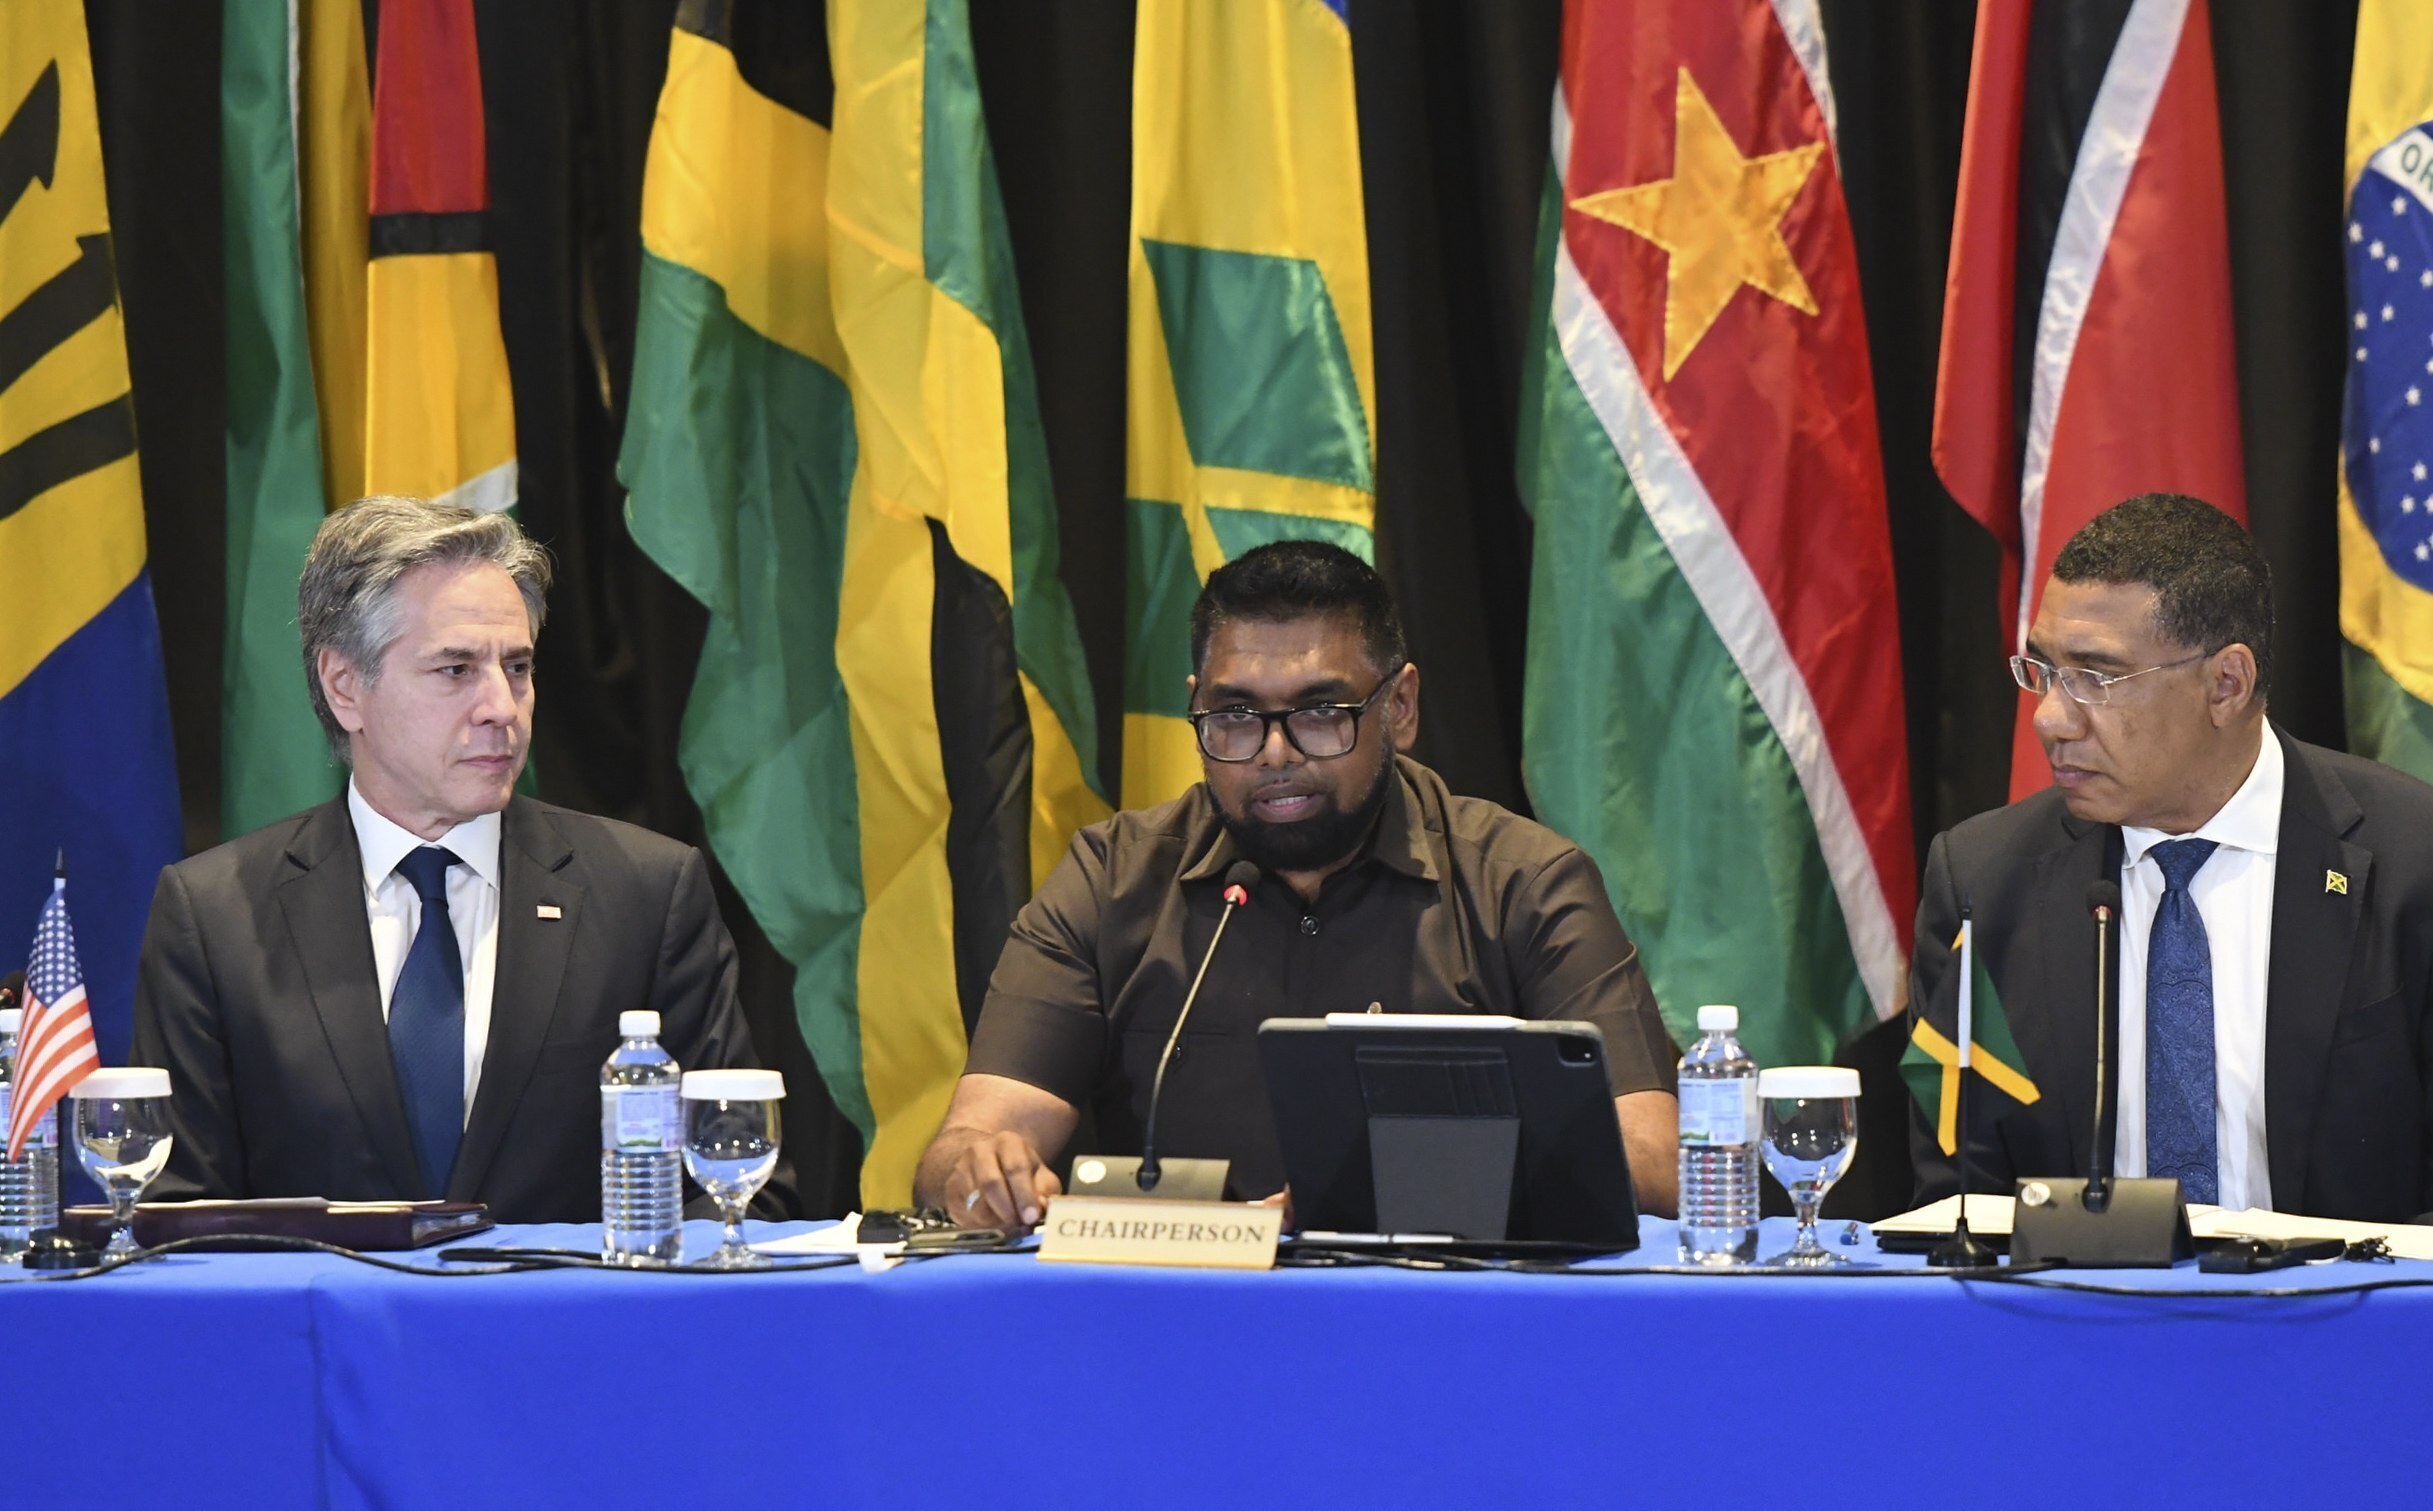 US Secretary of State Anthony Blinken oversees the proceedings conducted by CARICOM allies Guyanese President Irfaan Ali and Jamaican Prime Minister Andrew Holness in Kingston, Jamaica on March 11, 2024. Photo: AP/Collin Reid.